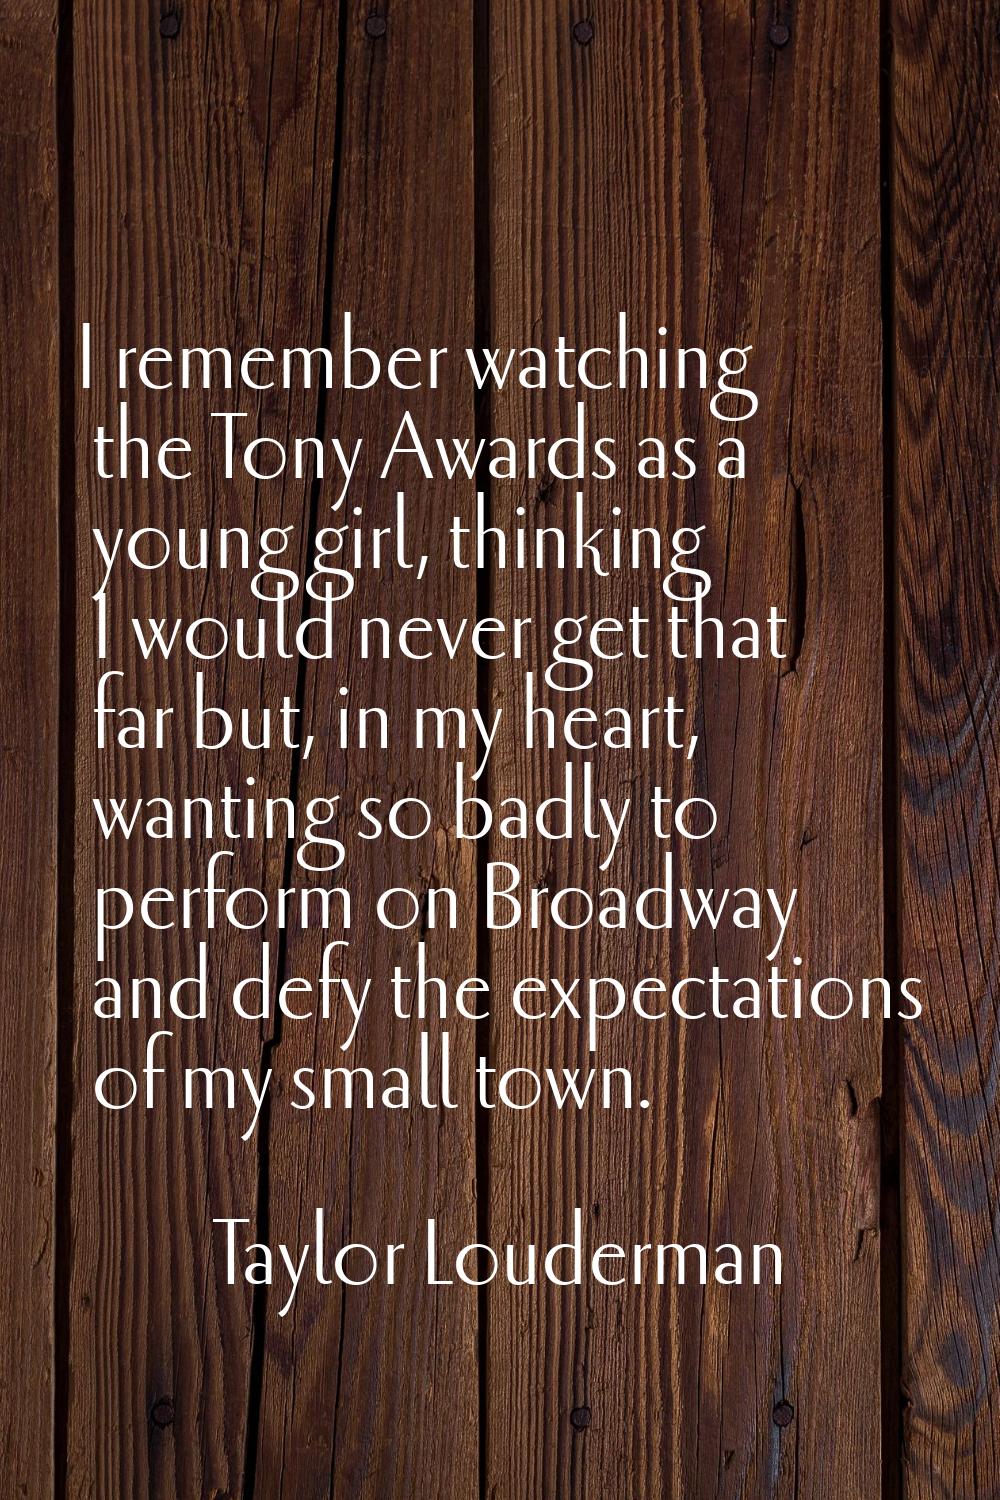 I remember watching the Tony Awards as a young girl, thinking I would never get that far but, in my